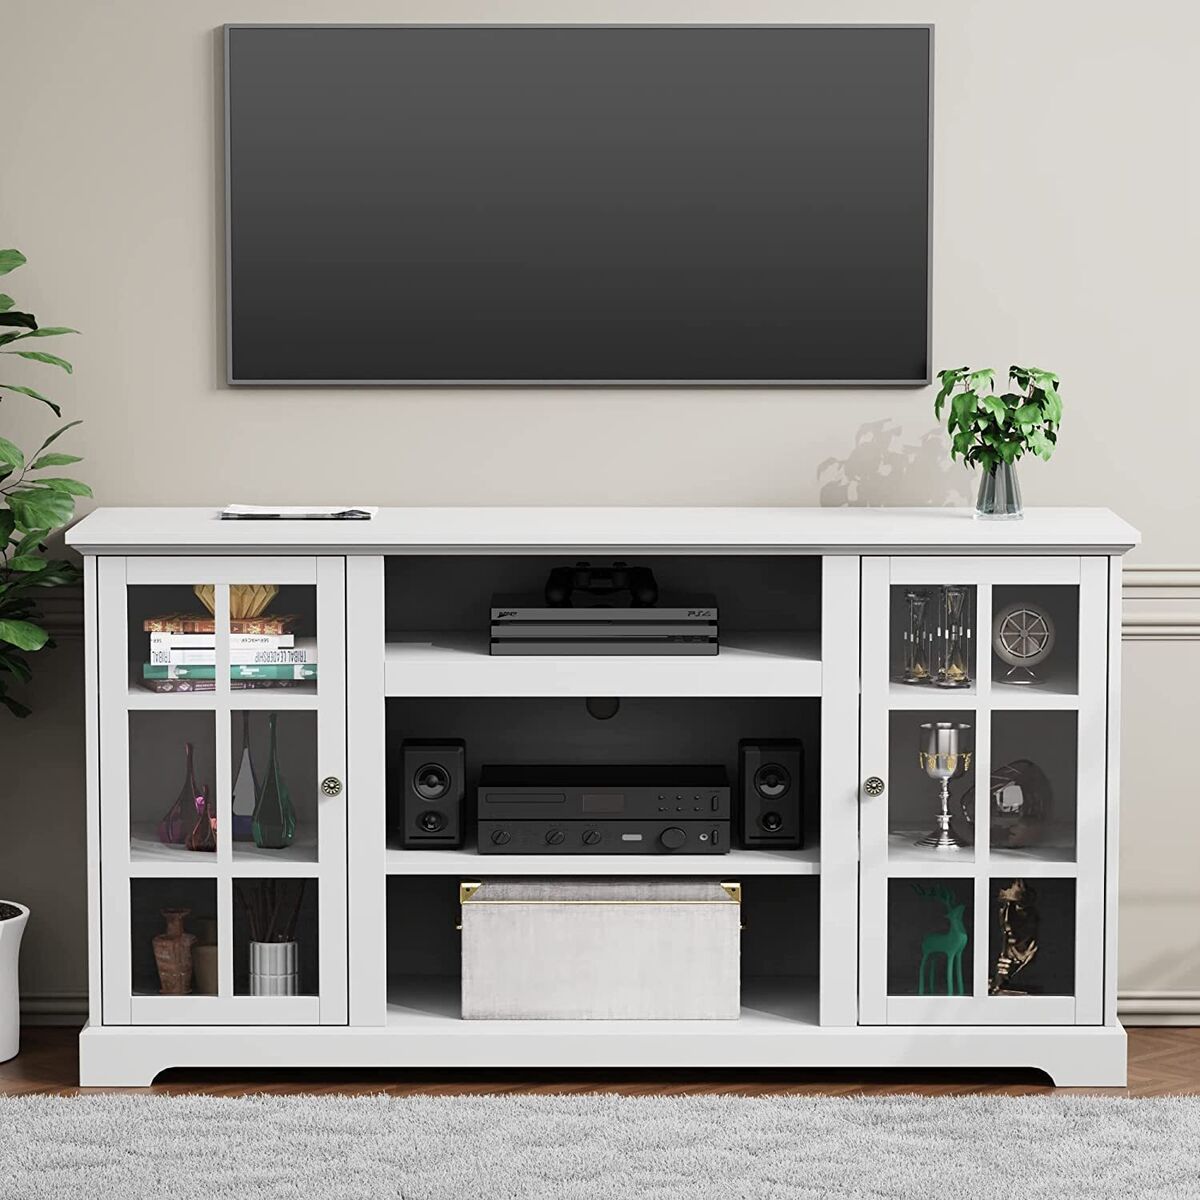 Farmhouse Tv Stand For Tv'S Up To 65" Entertainment Center W/ Storage  Shelves | Ebay Inside Farmhouse Stands For Tvs (View 11 of 15)